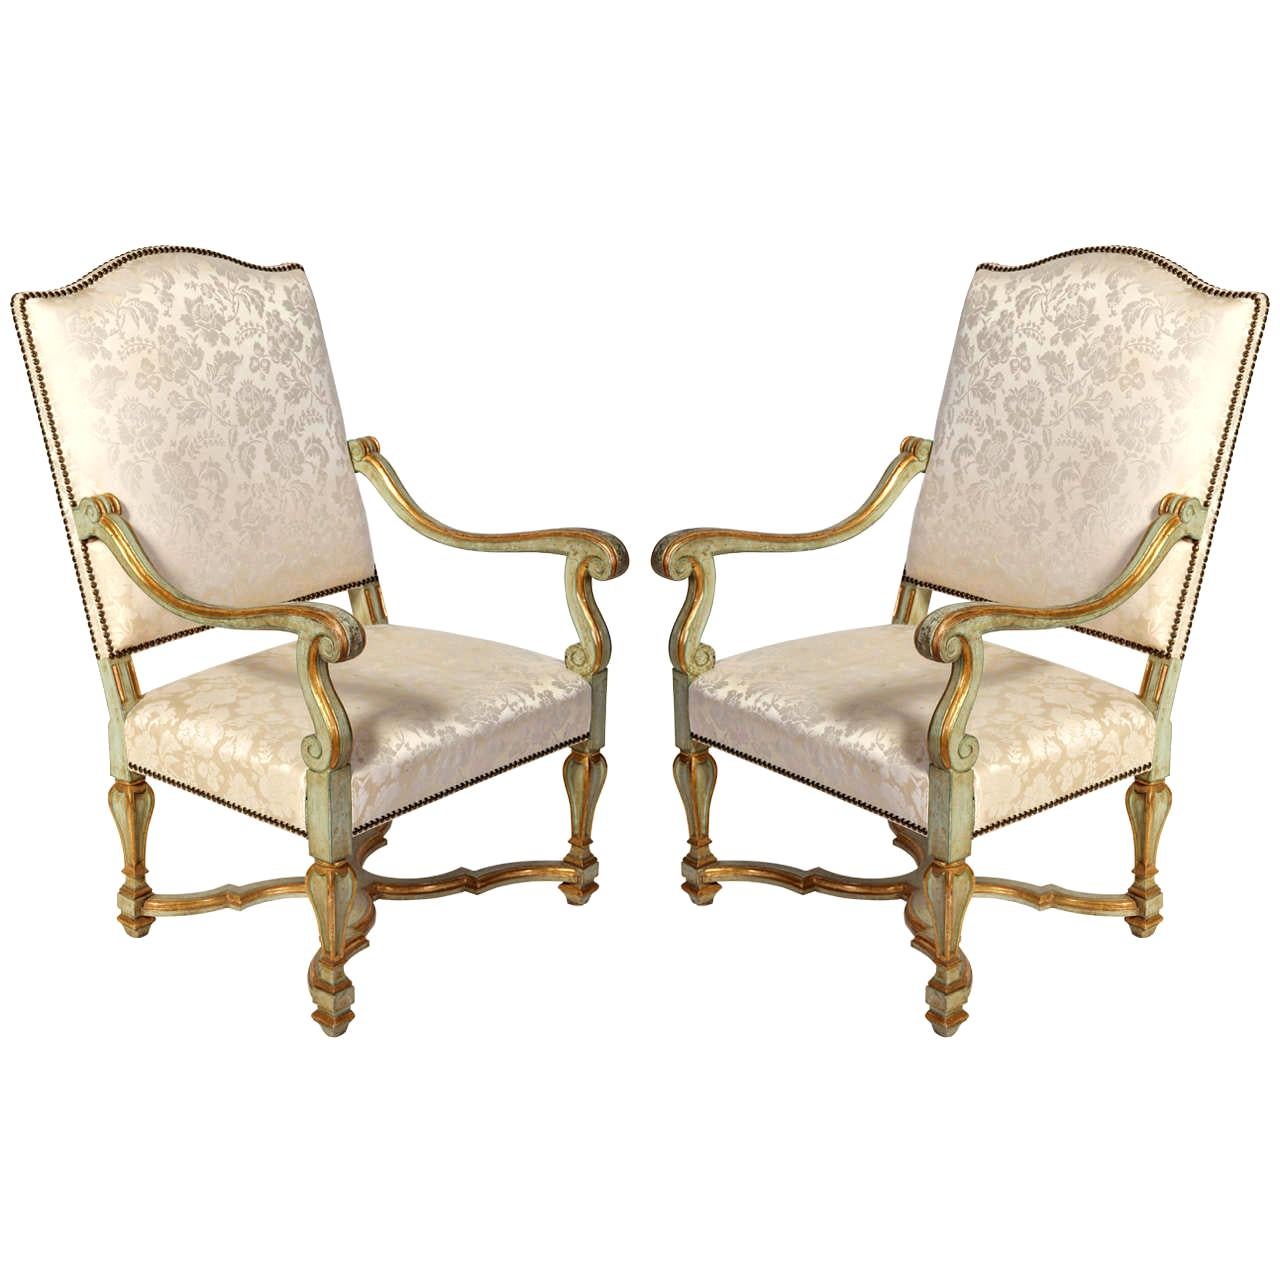 Pair of Italian Early 18th Century Painted Armchairs